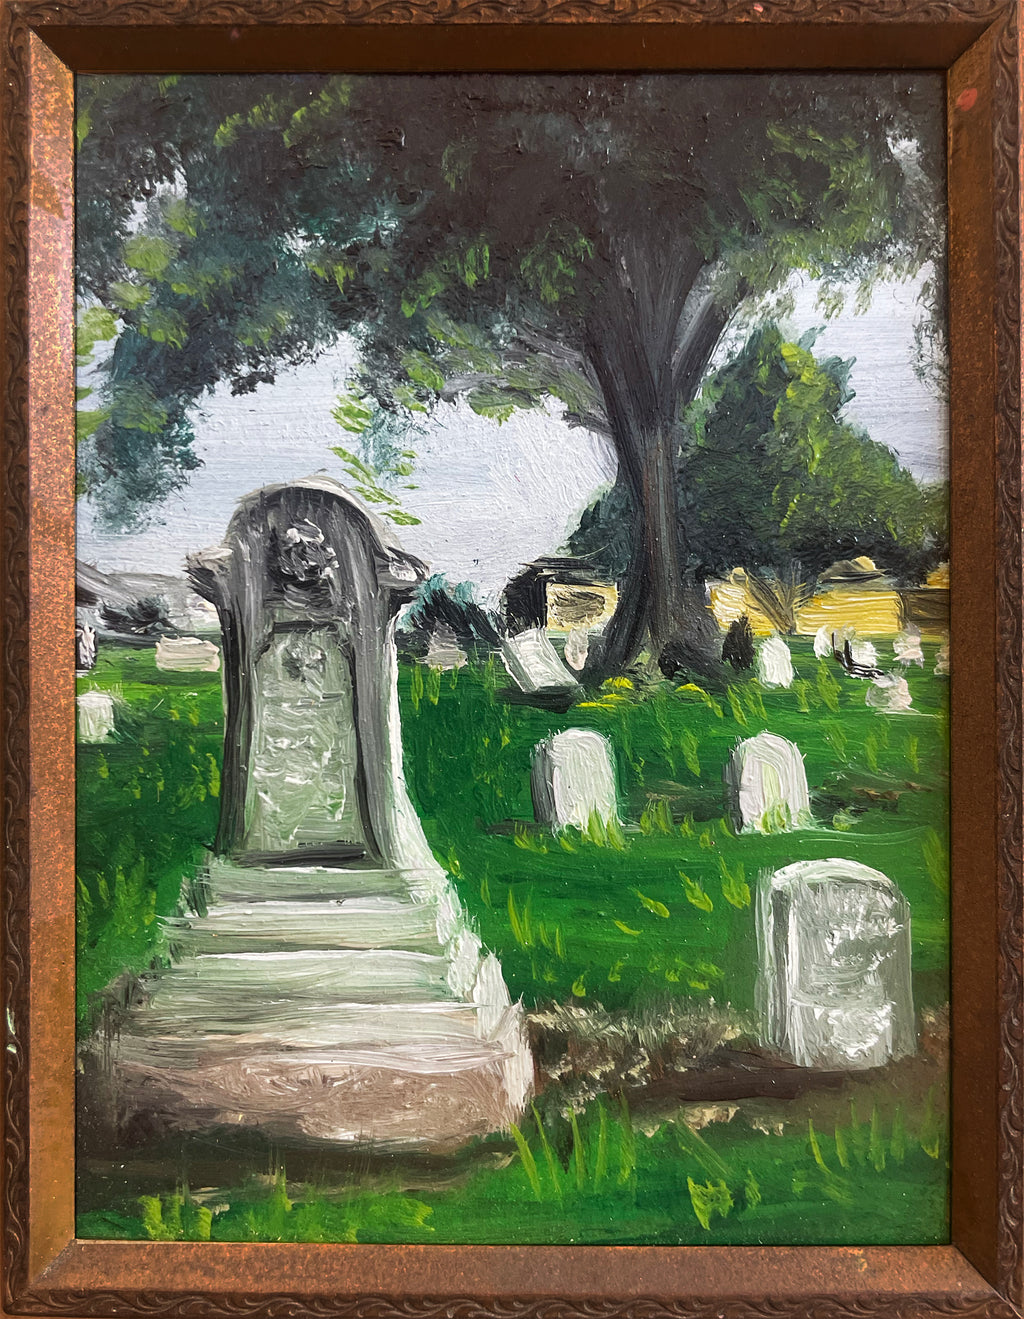 Cemetery Study (Large on the Left)